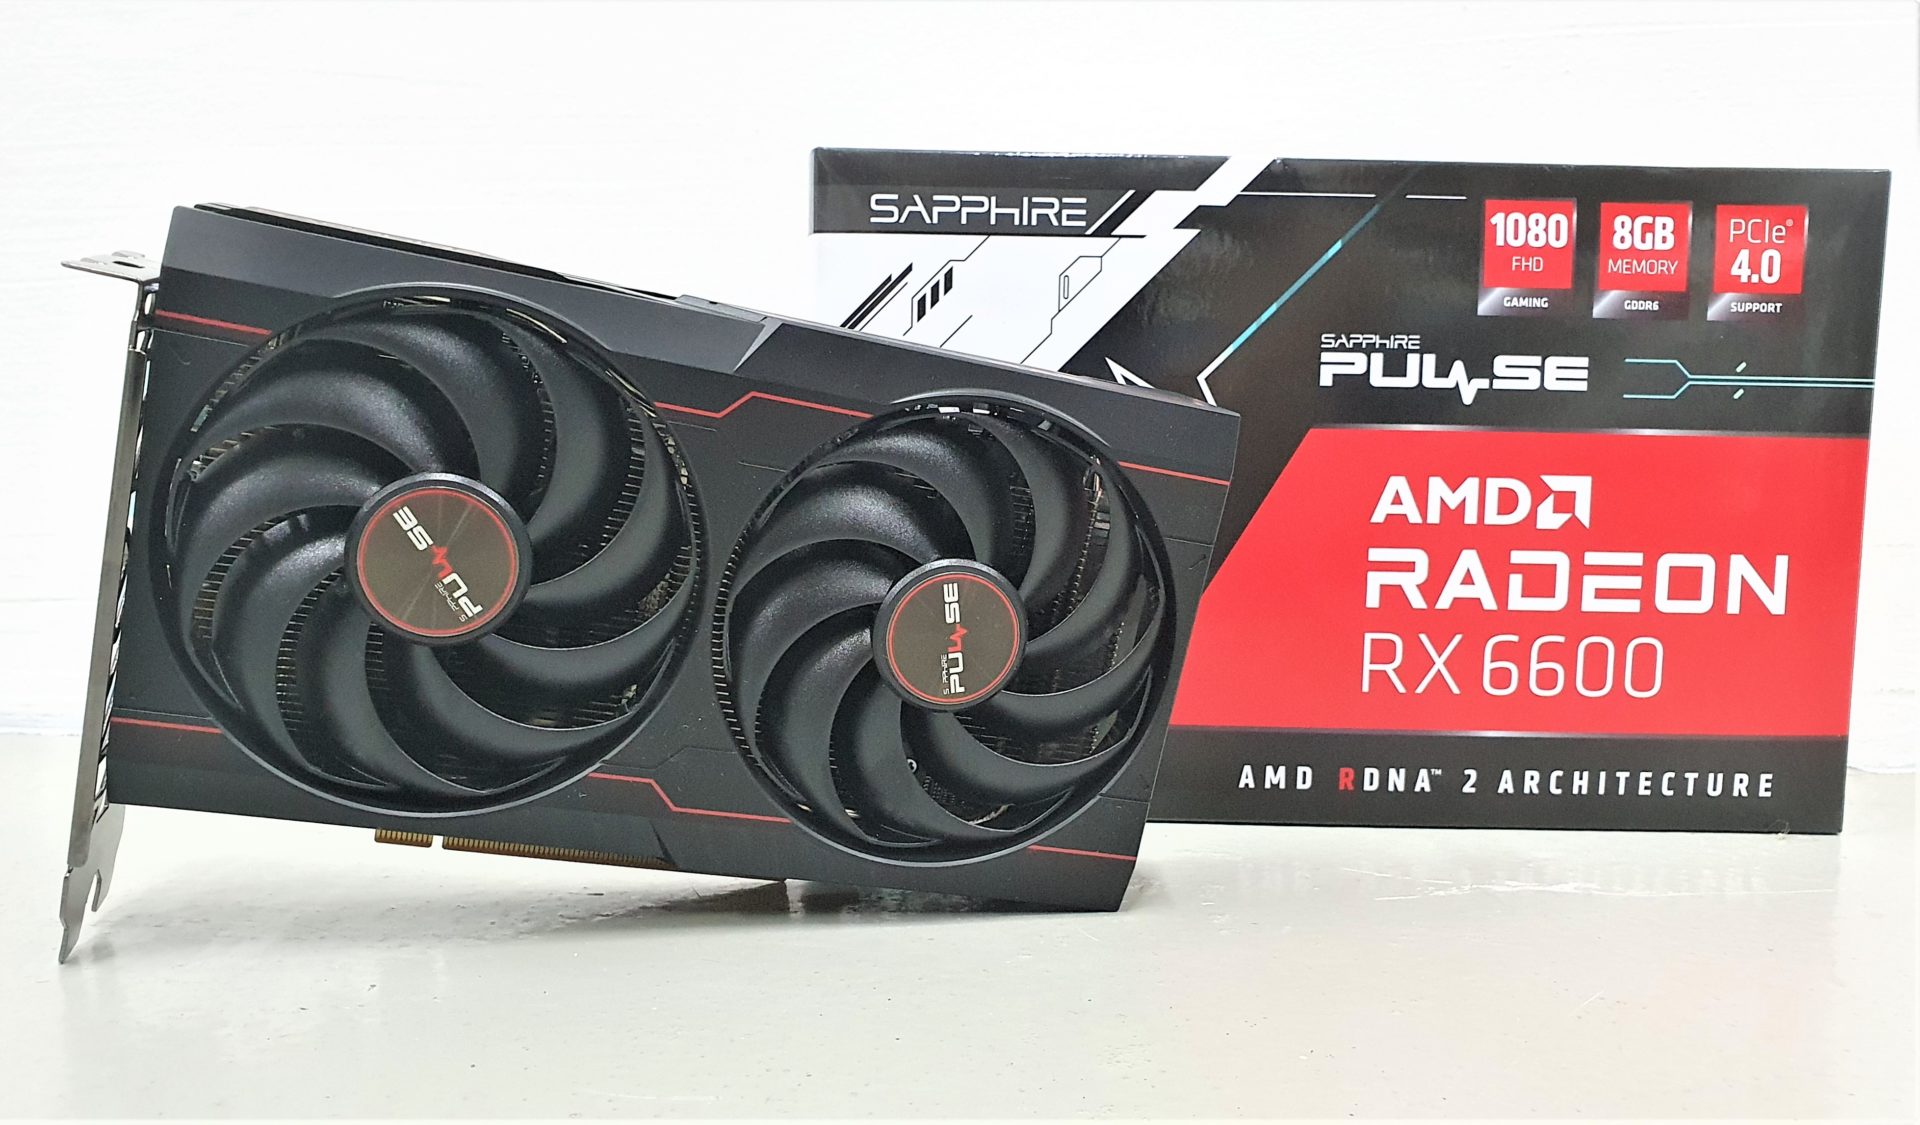 Sapphire Pulse AMD Radeon RX 6600 Gaming 8GB Review - The more 